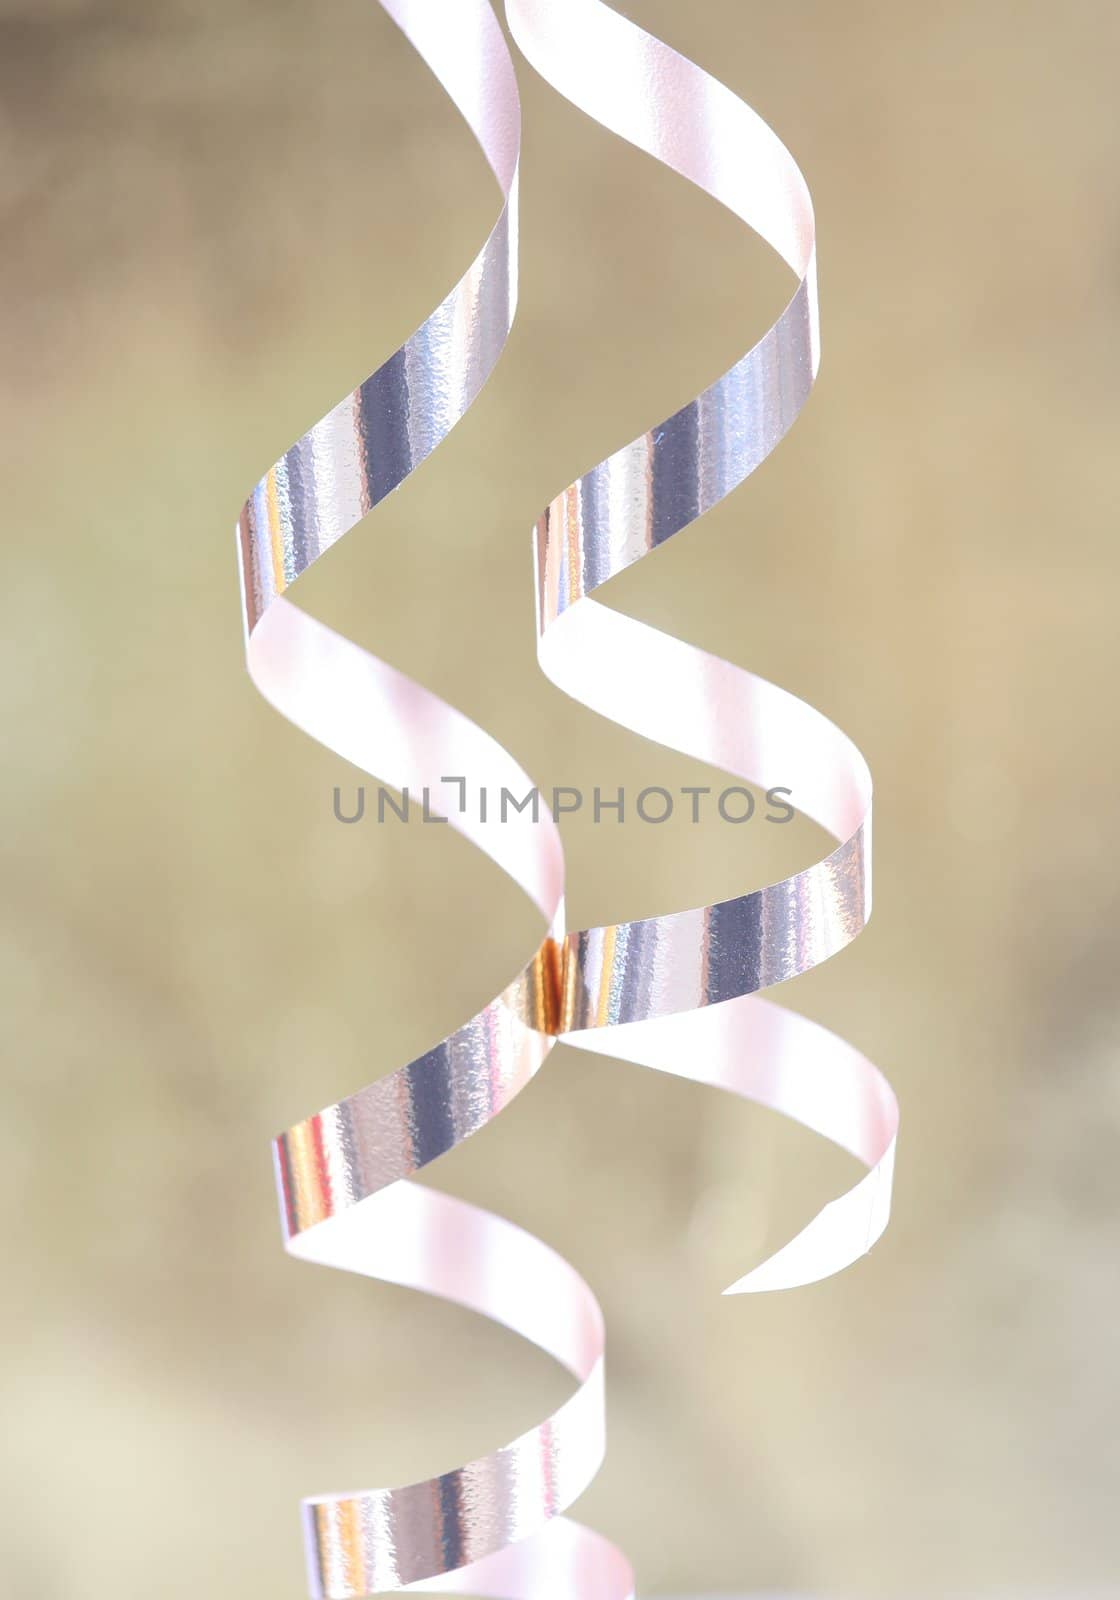 Gold satin ribbons curled elegantly, holiday party theme by jarenwicklund